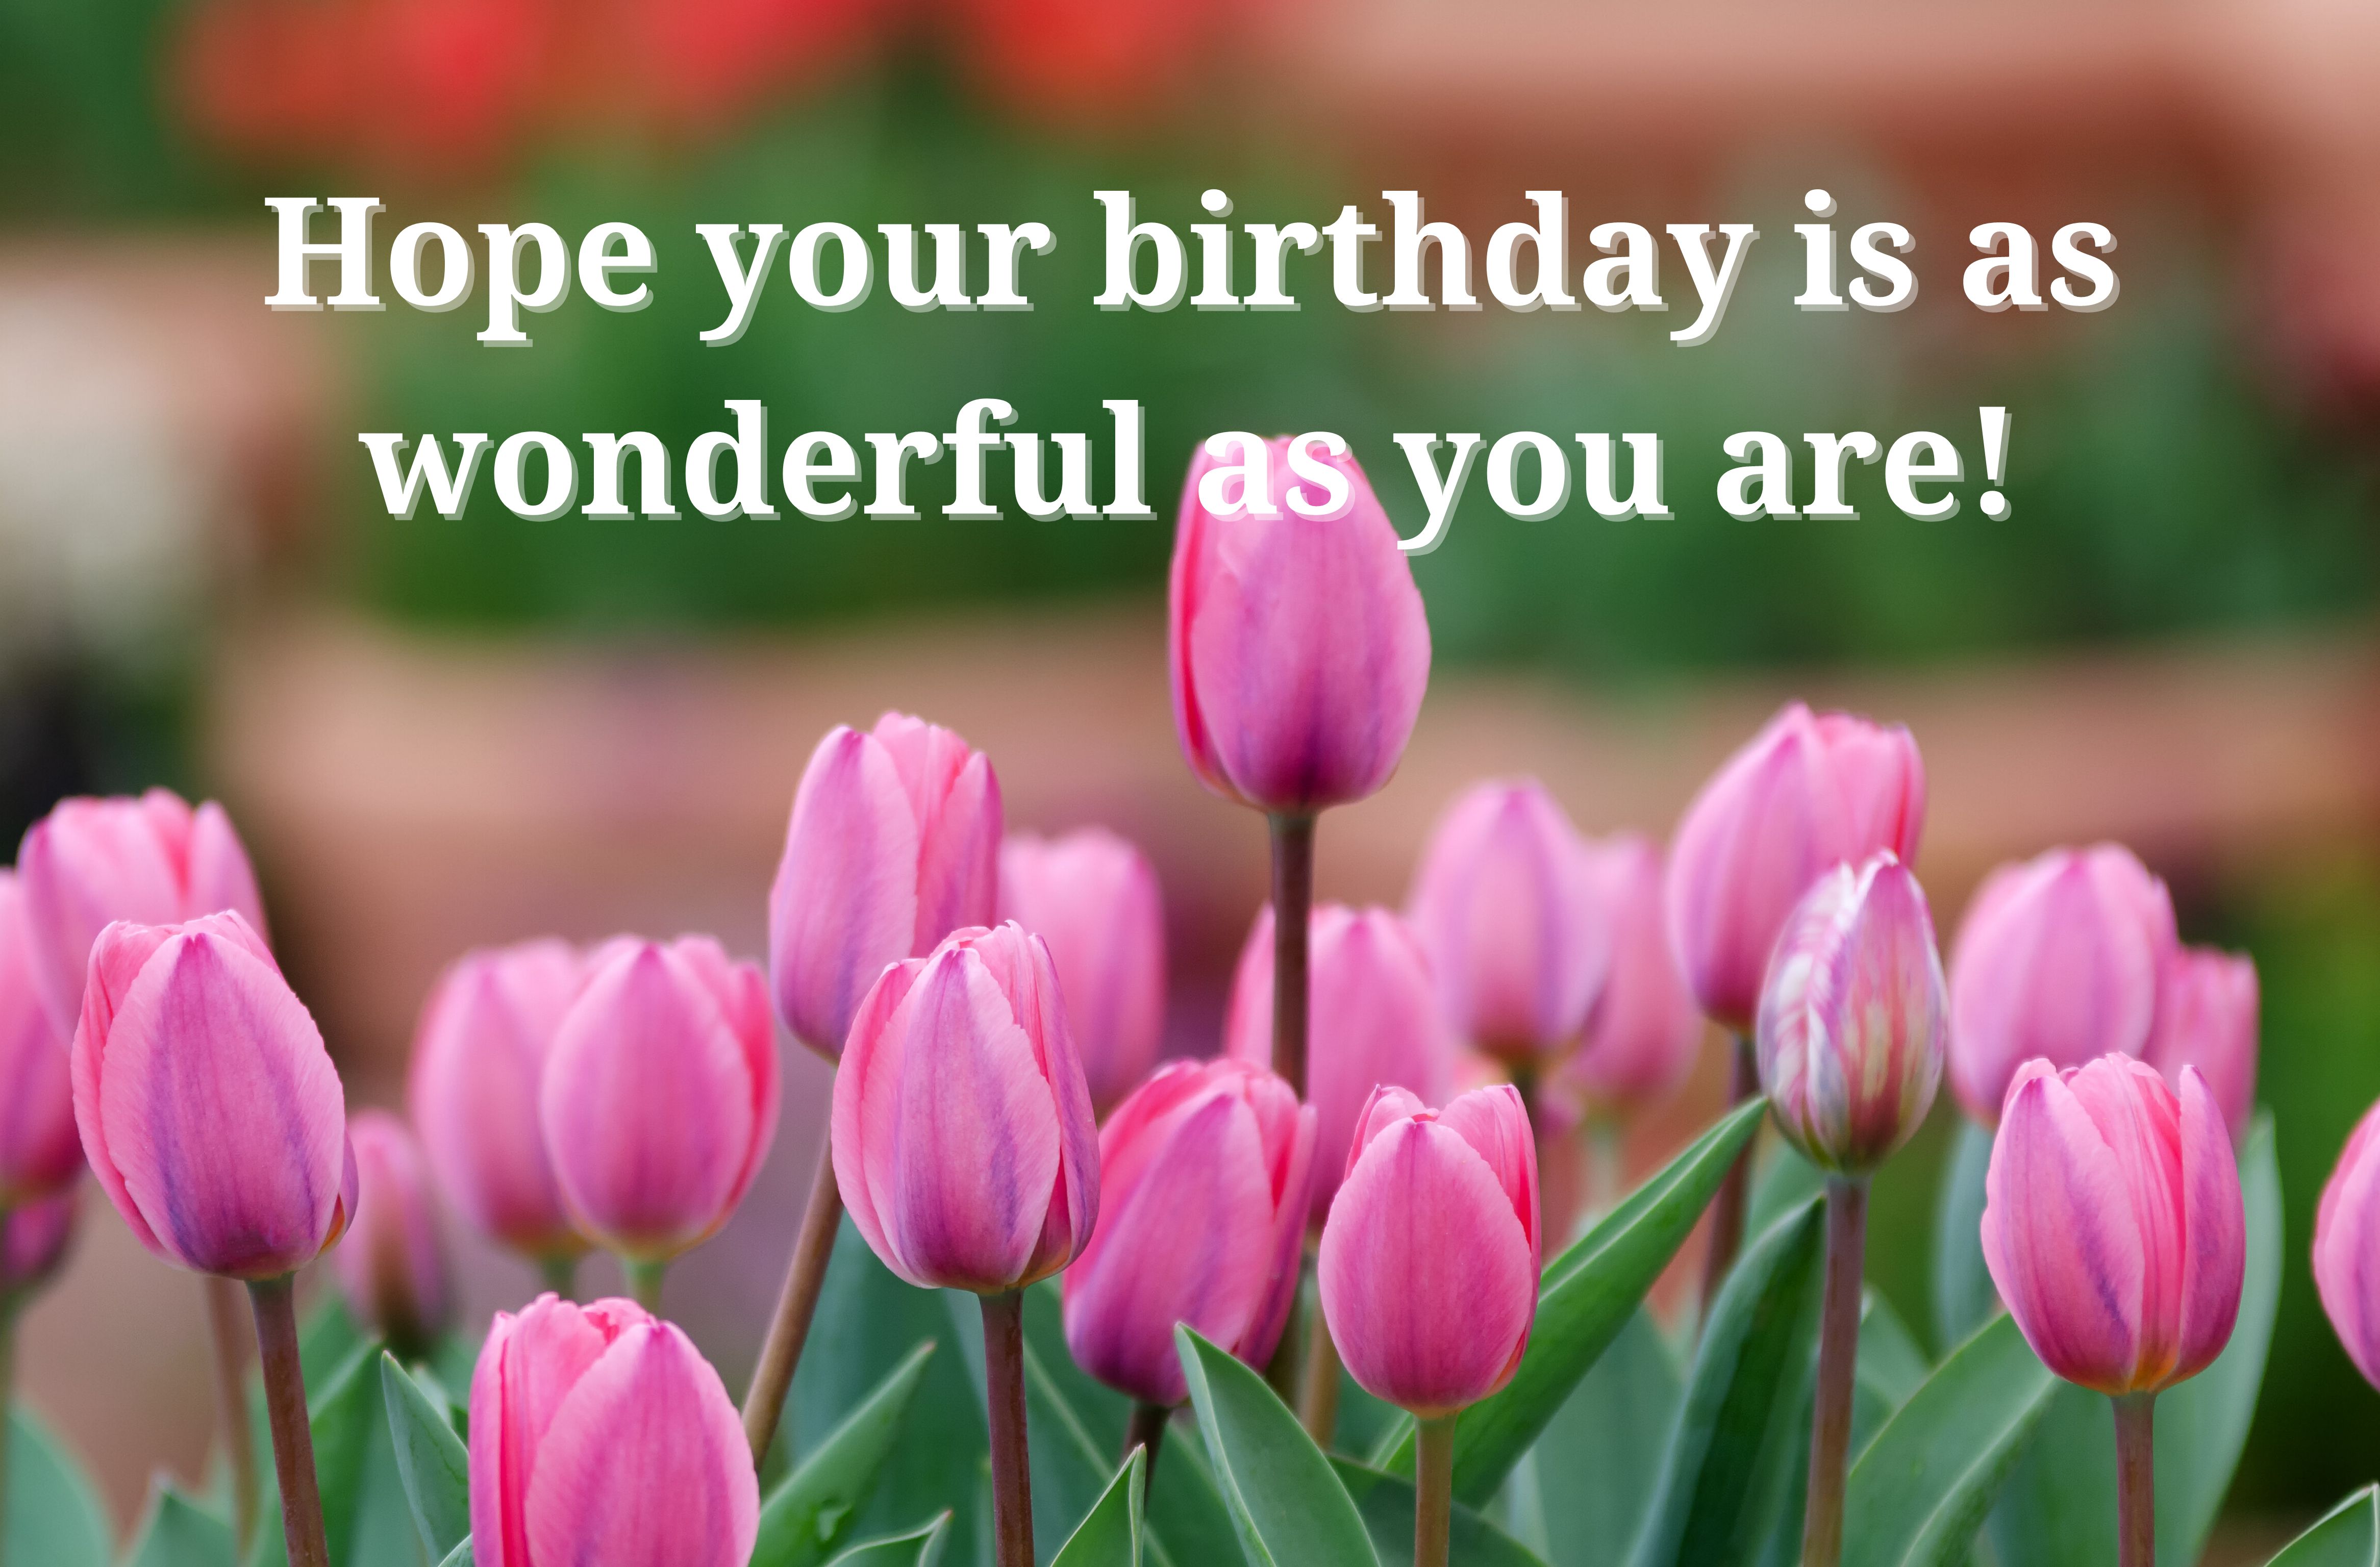 The 24 Best Birthday Card Wishes for Your Brother-in-Law